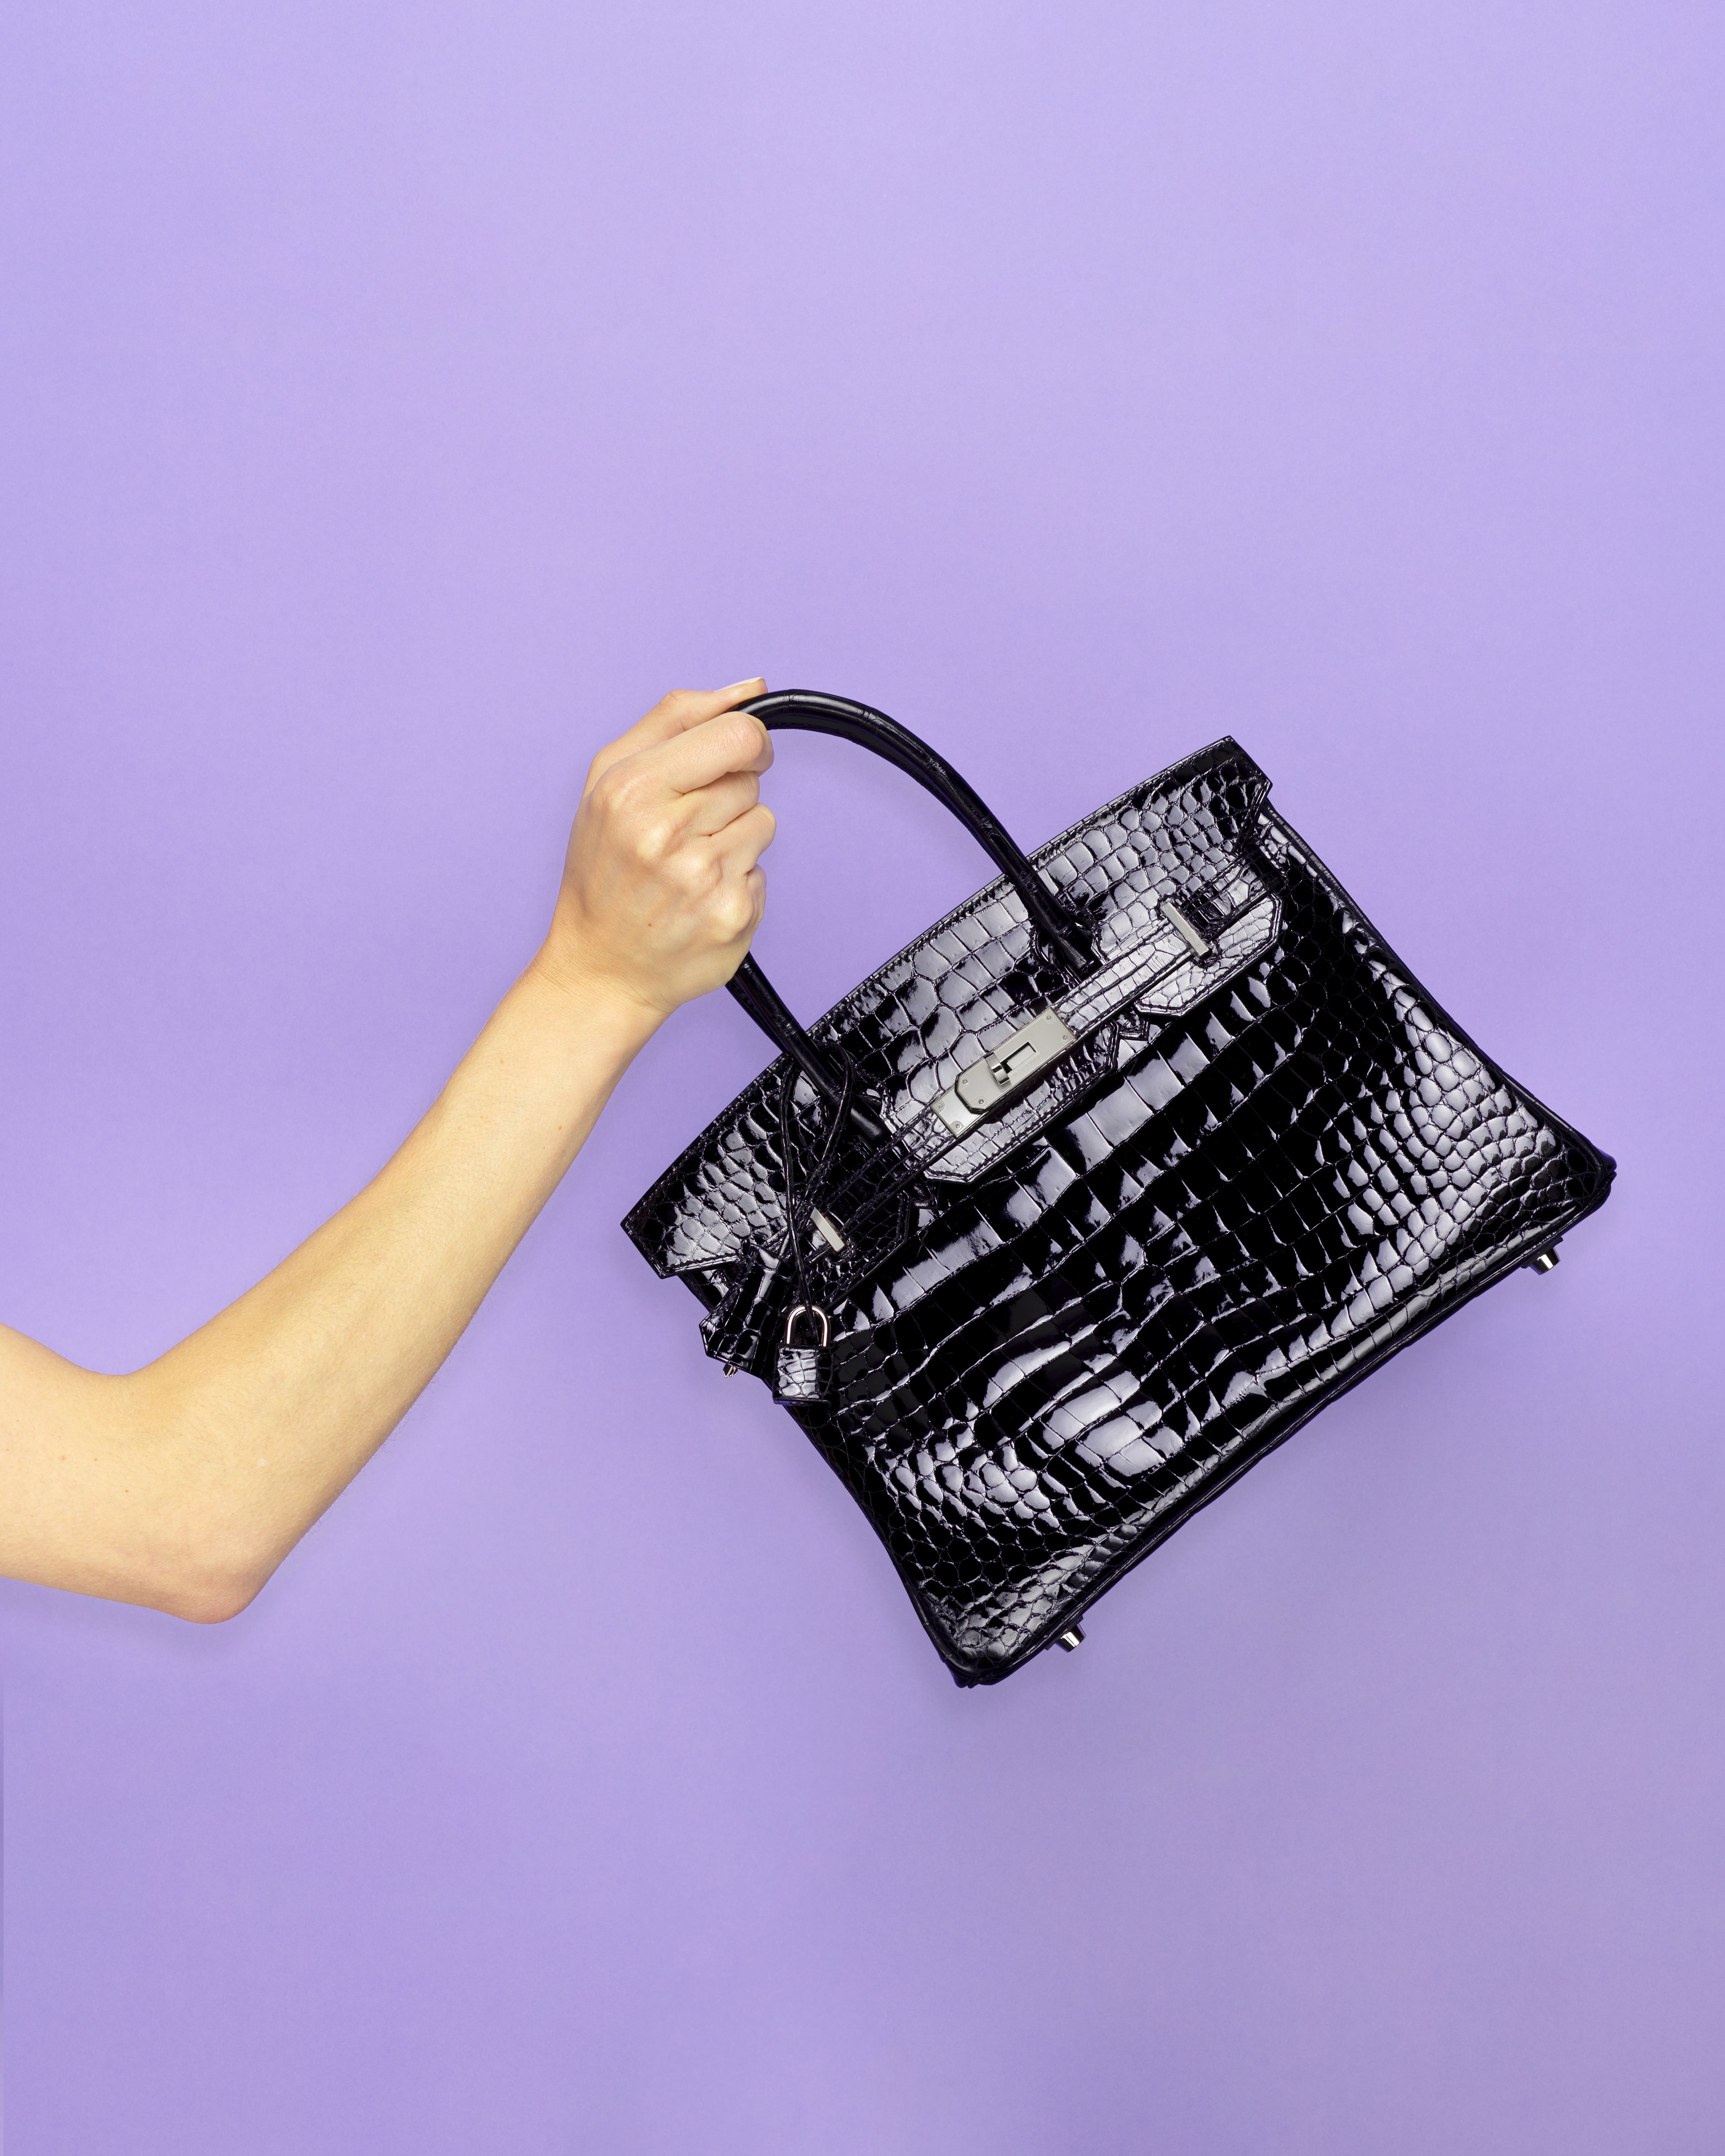 How to start a luxury handbag collection: The experts at Bagover share  their tips